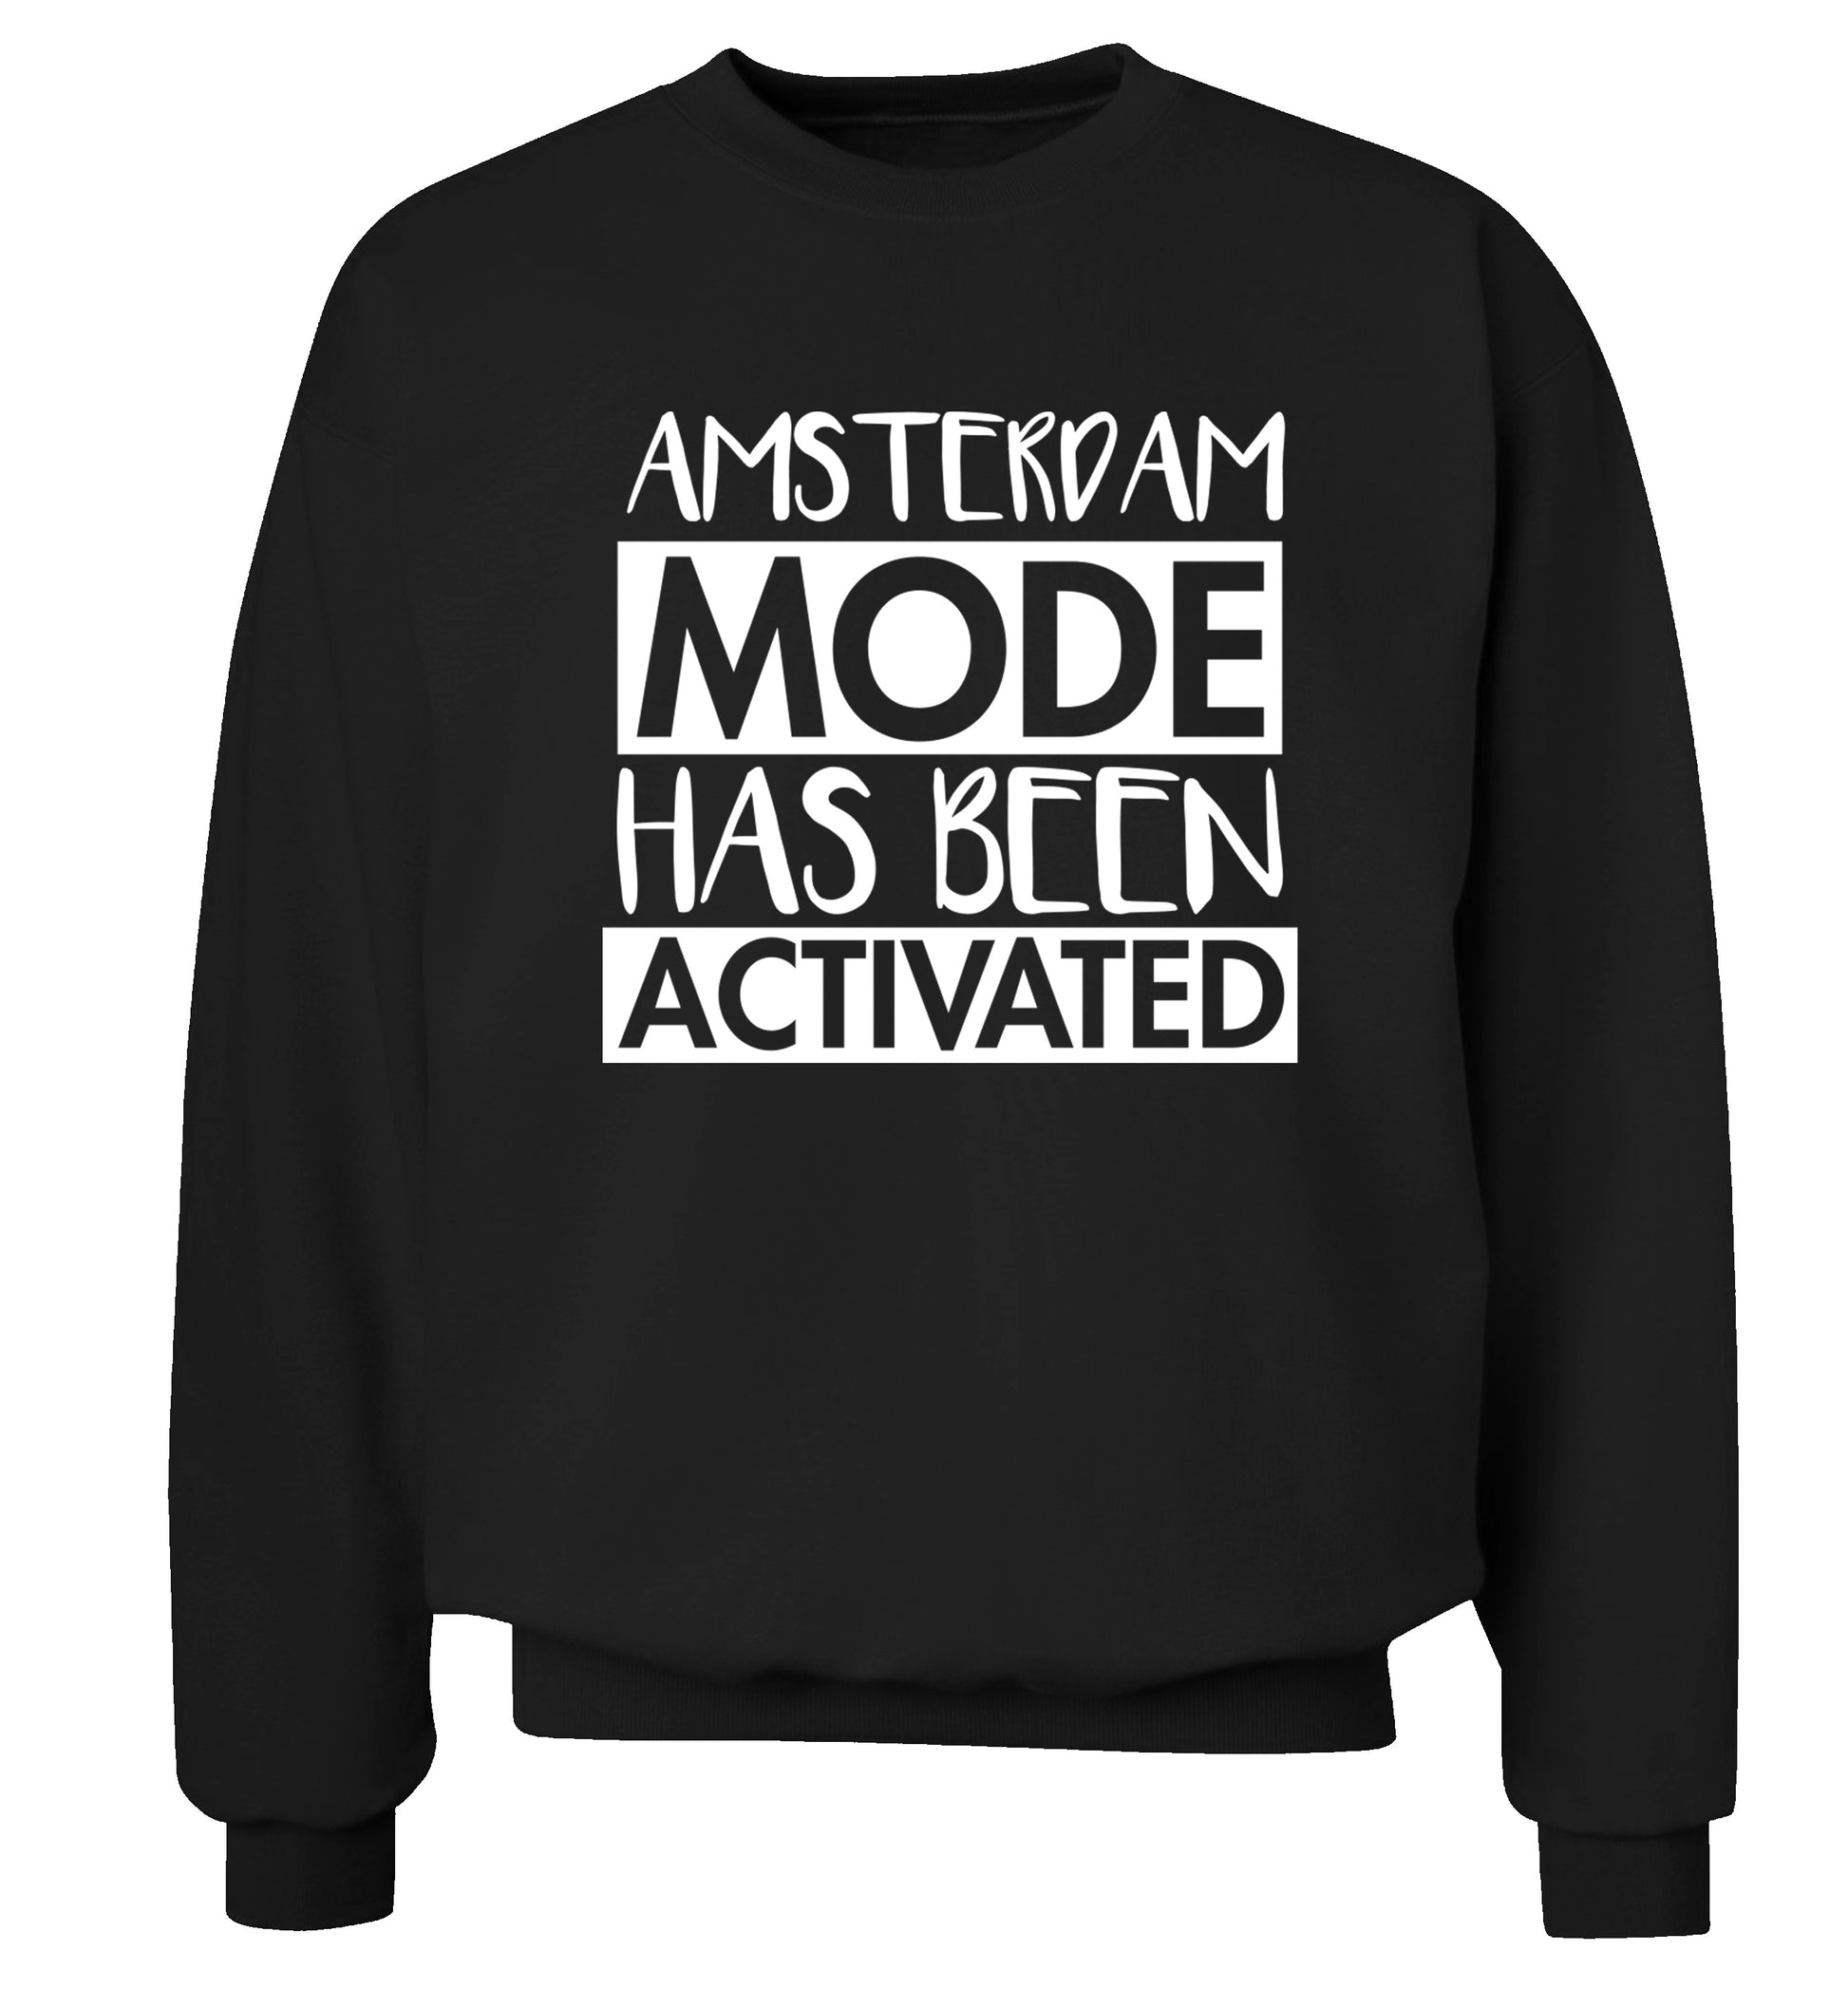 Amsterdam mode has been activated Adult's unisex black Sweater 2XL